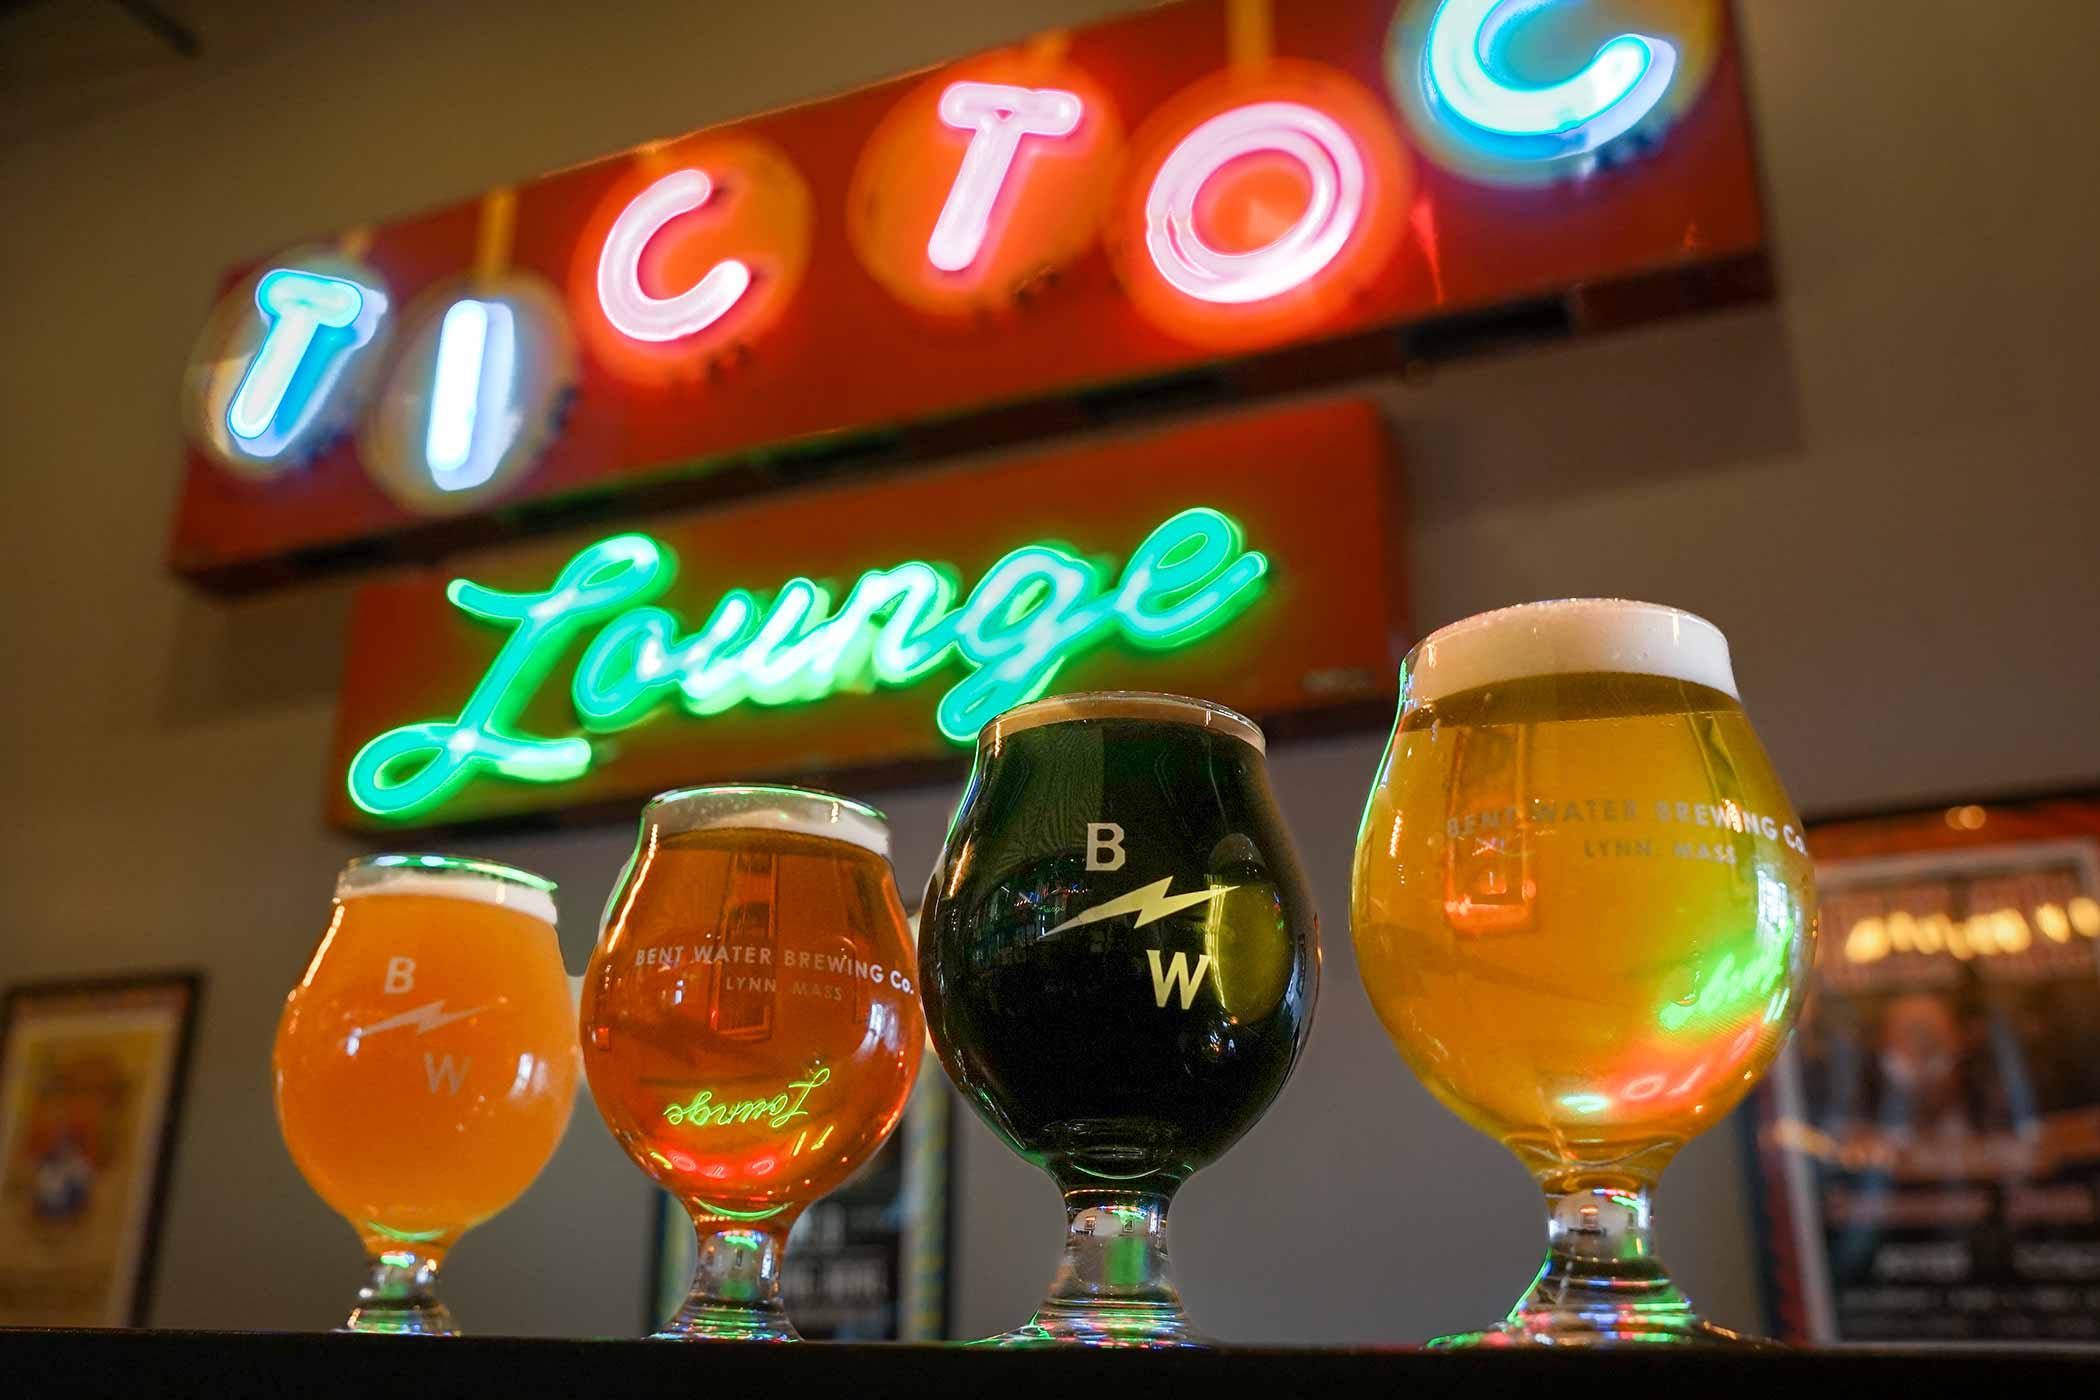 The Top 11 Breweries to Visit in Greater Boston